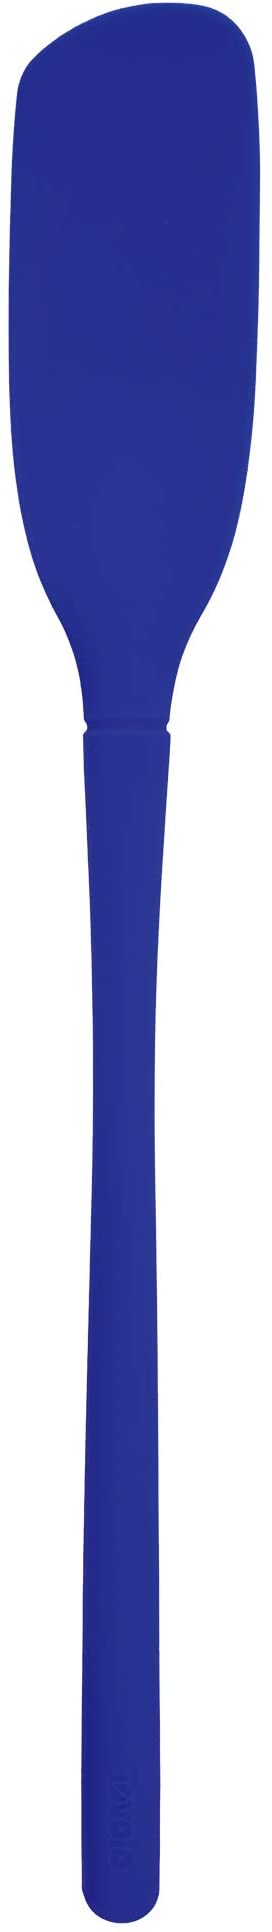 Tovolo 81-23154 Flex-Core Flexible Edge Blender Extra-Long Handle Angled Head Reaches Below Blades, Silicone Spatula for Smoothies & Blended Cocktails, 1 EA, Stratus Blue